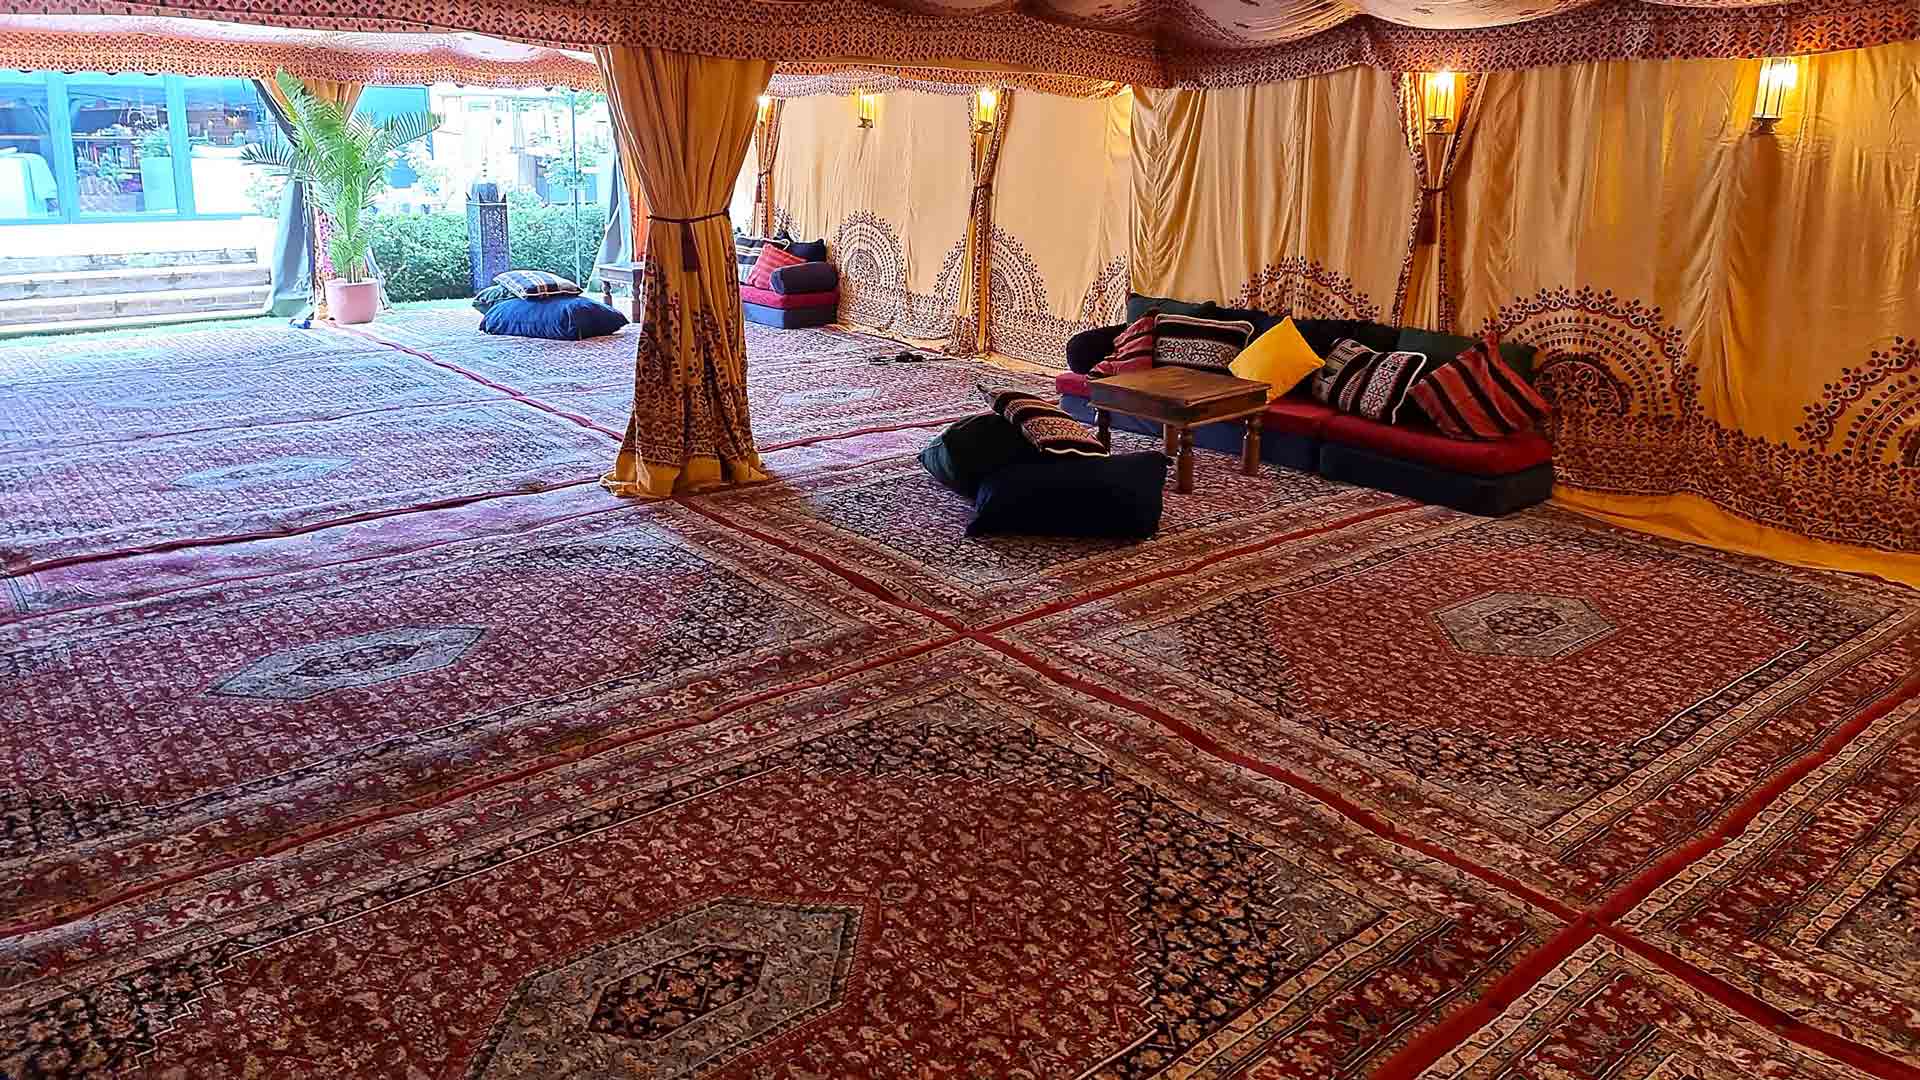 Hired Persian Rugs Joined Together to Make a Large Arabian Carpet Inside a Bedouin Tent